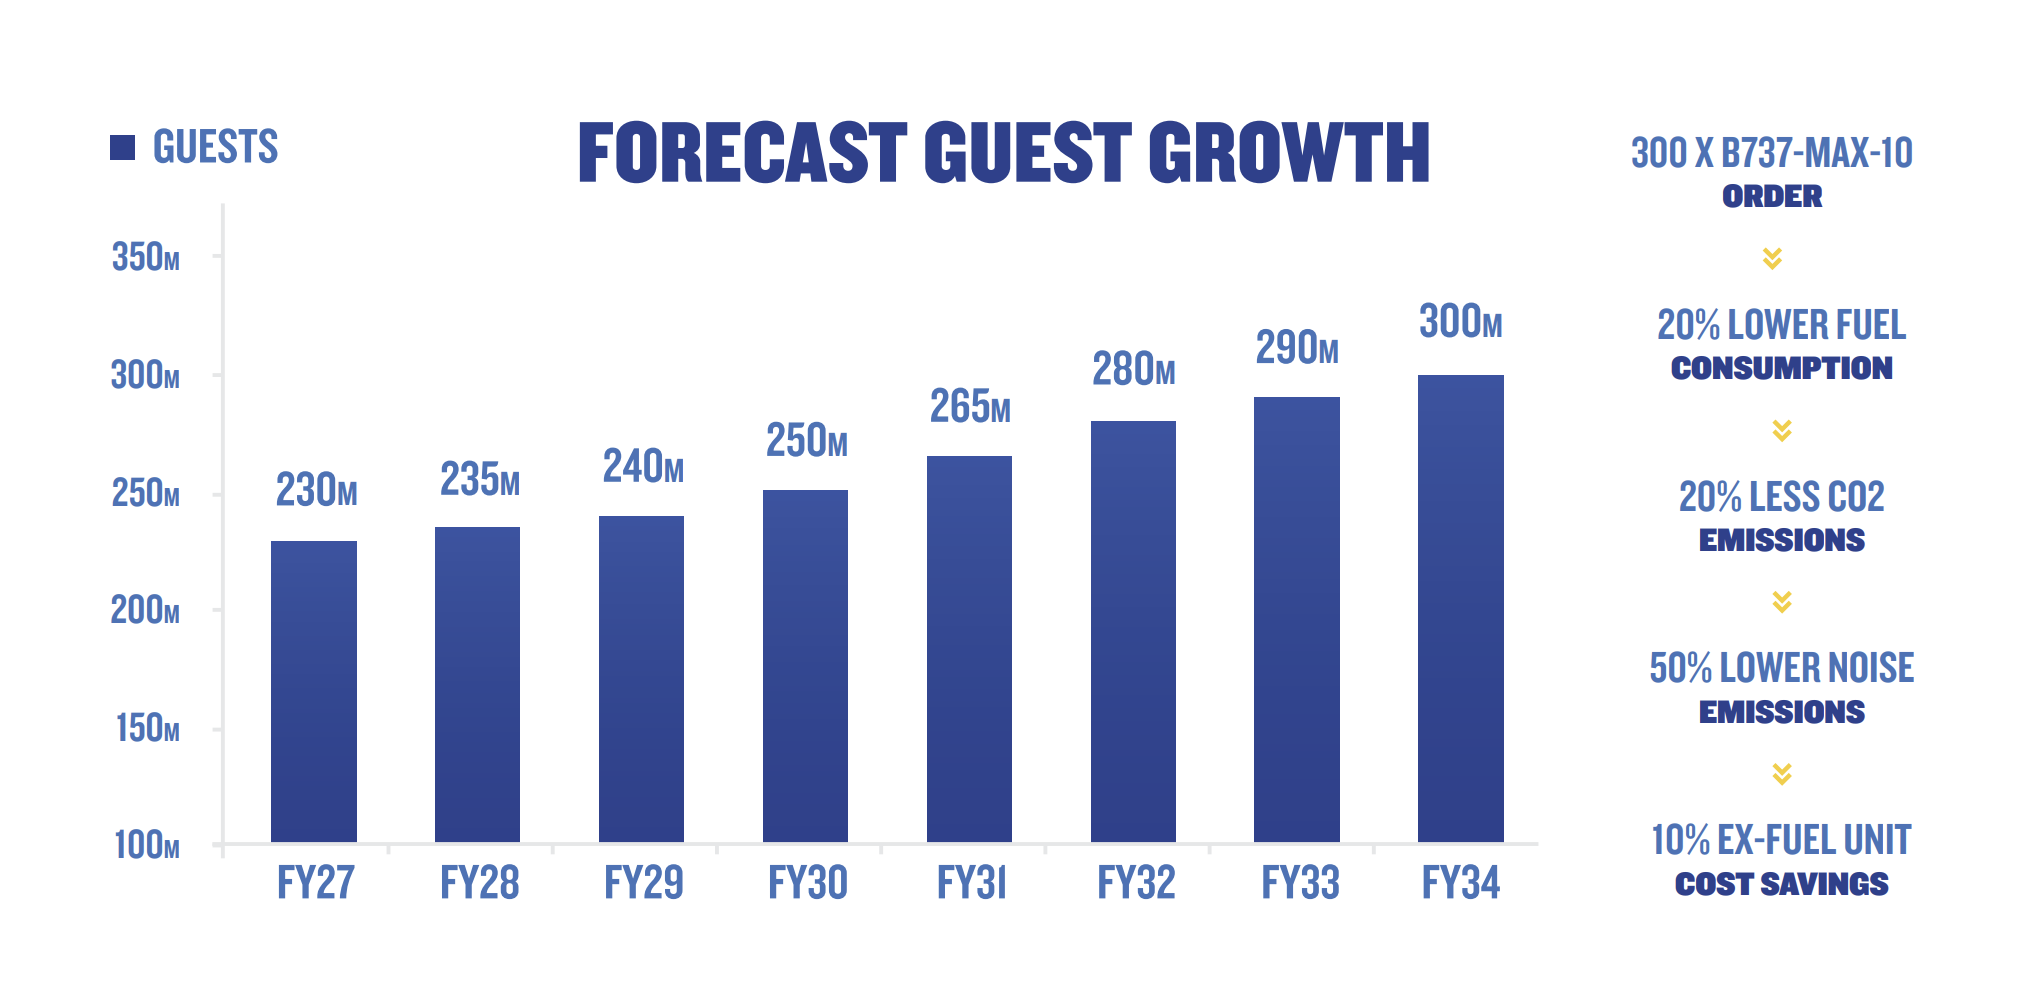 Ryanair Stock: Europe’s largest low-cost airline with 44.7% upside potential